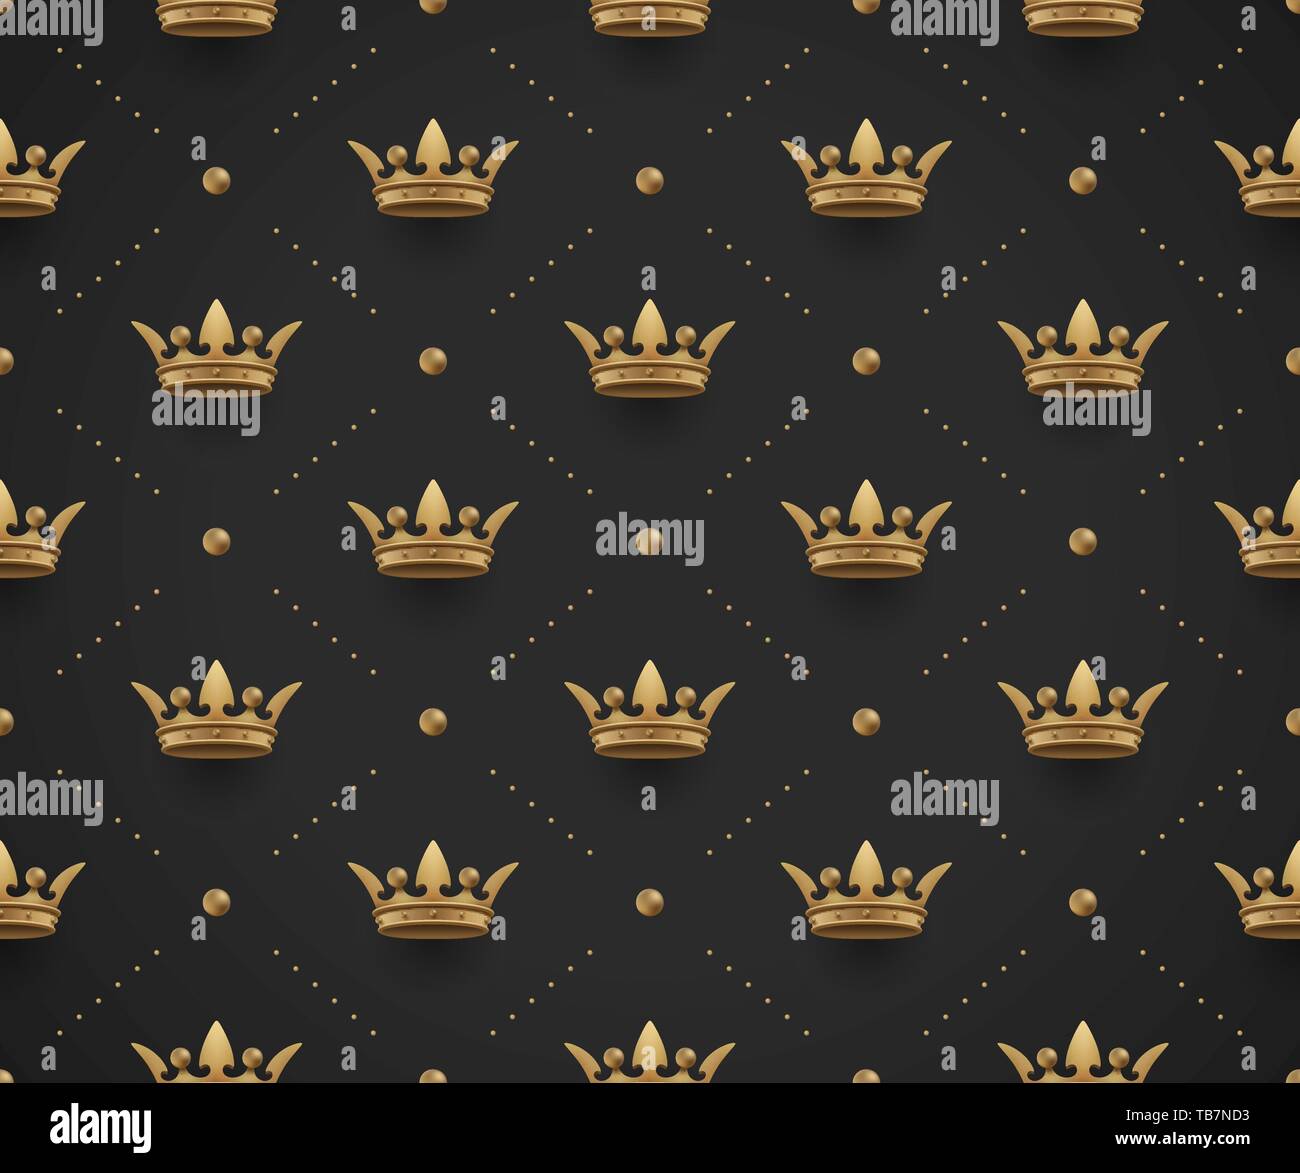 Seamless gold pattern with king crowns on a dark black background Vector  Illustration Stock Vector Image  Art  Alamy